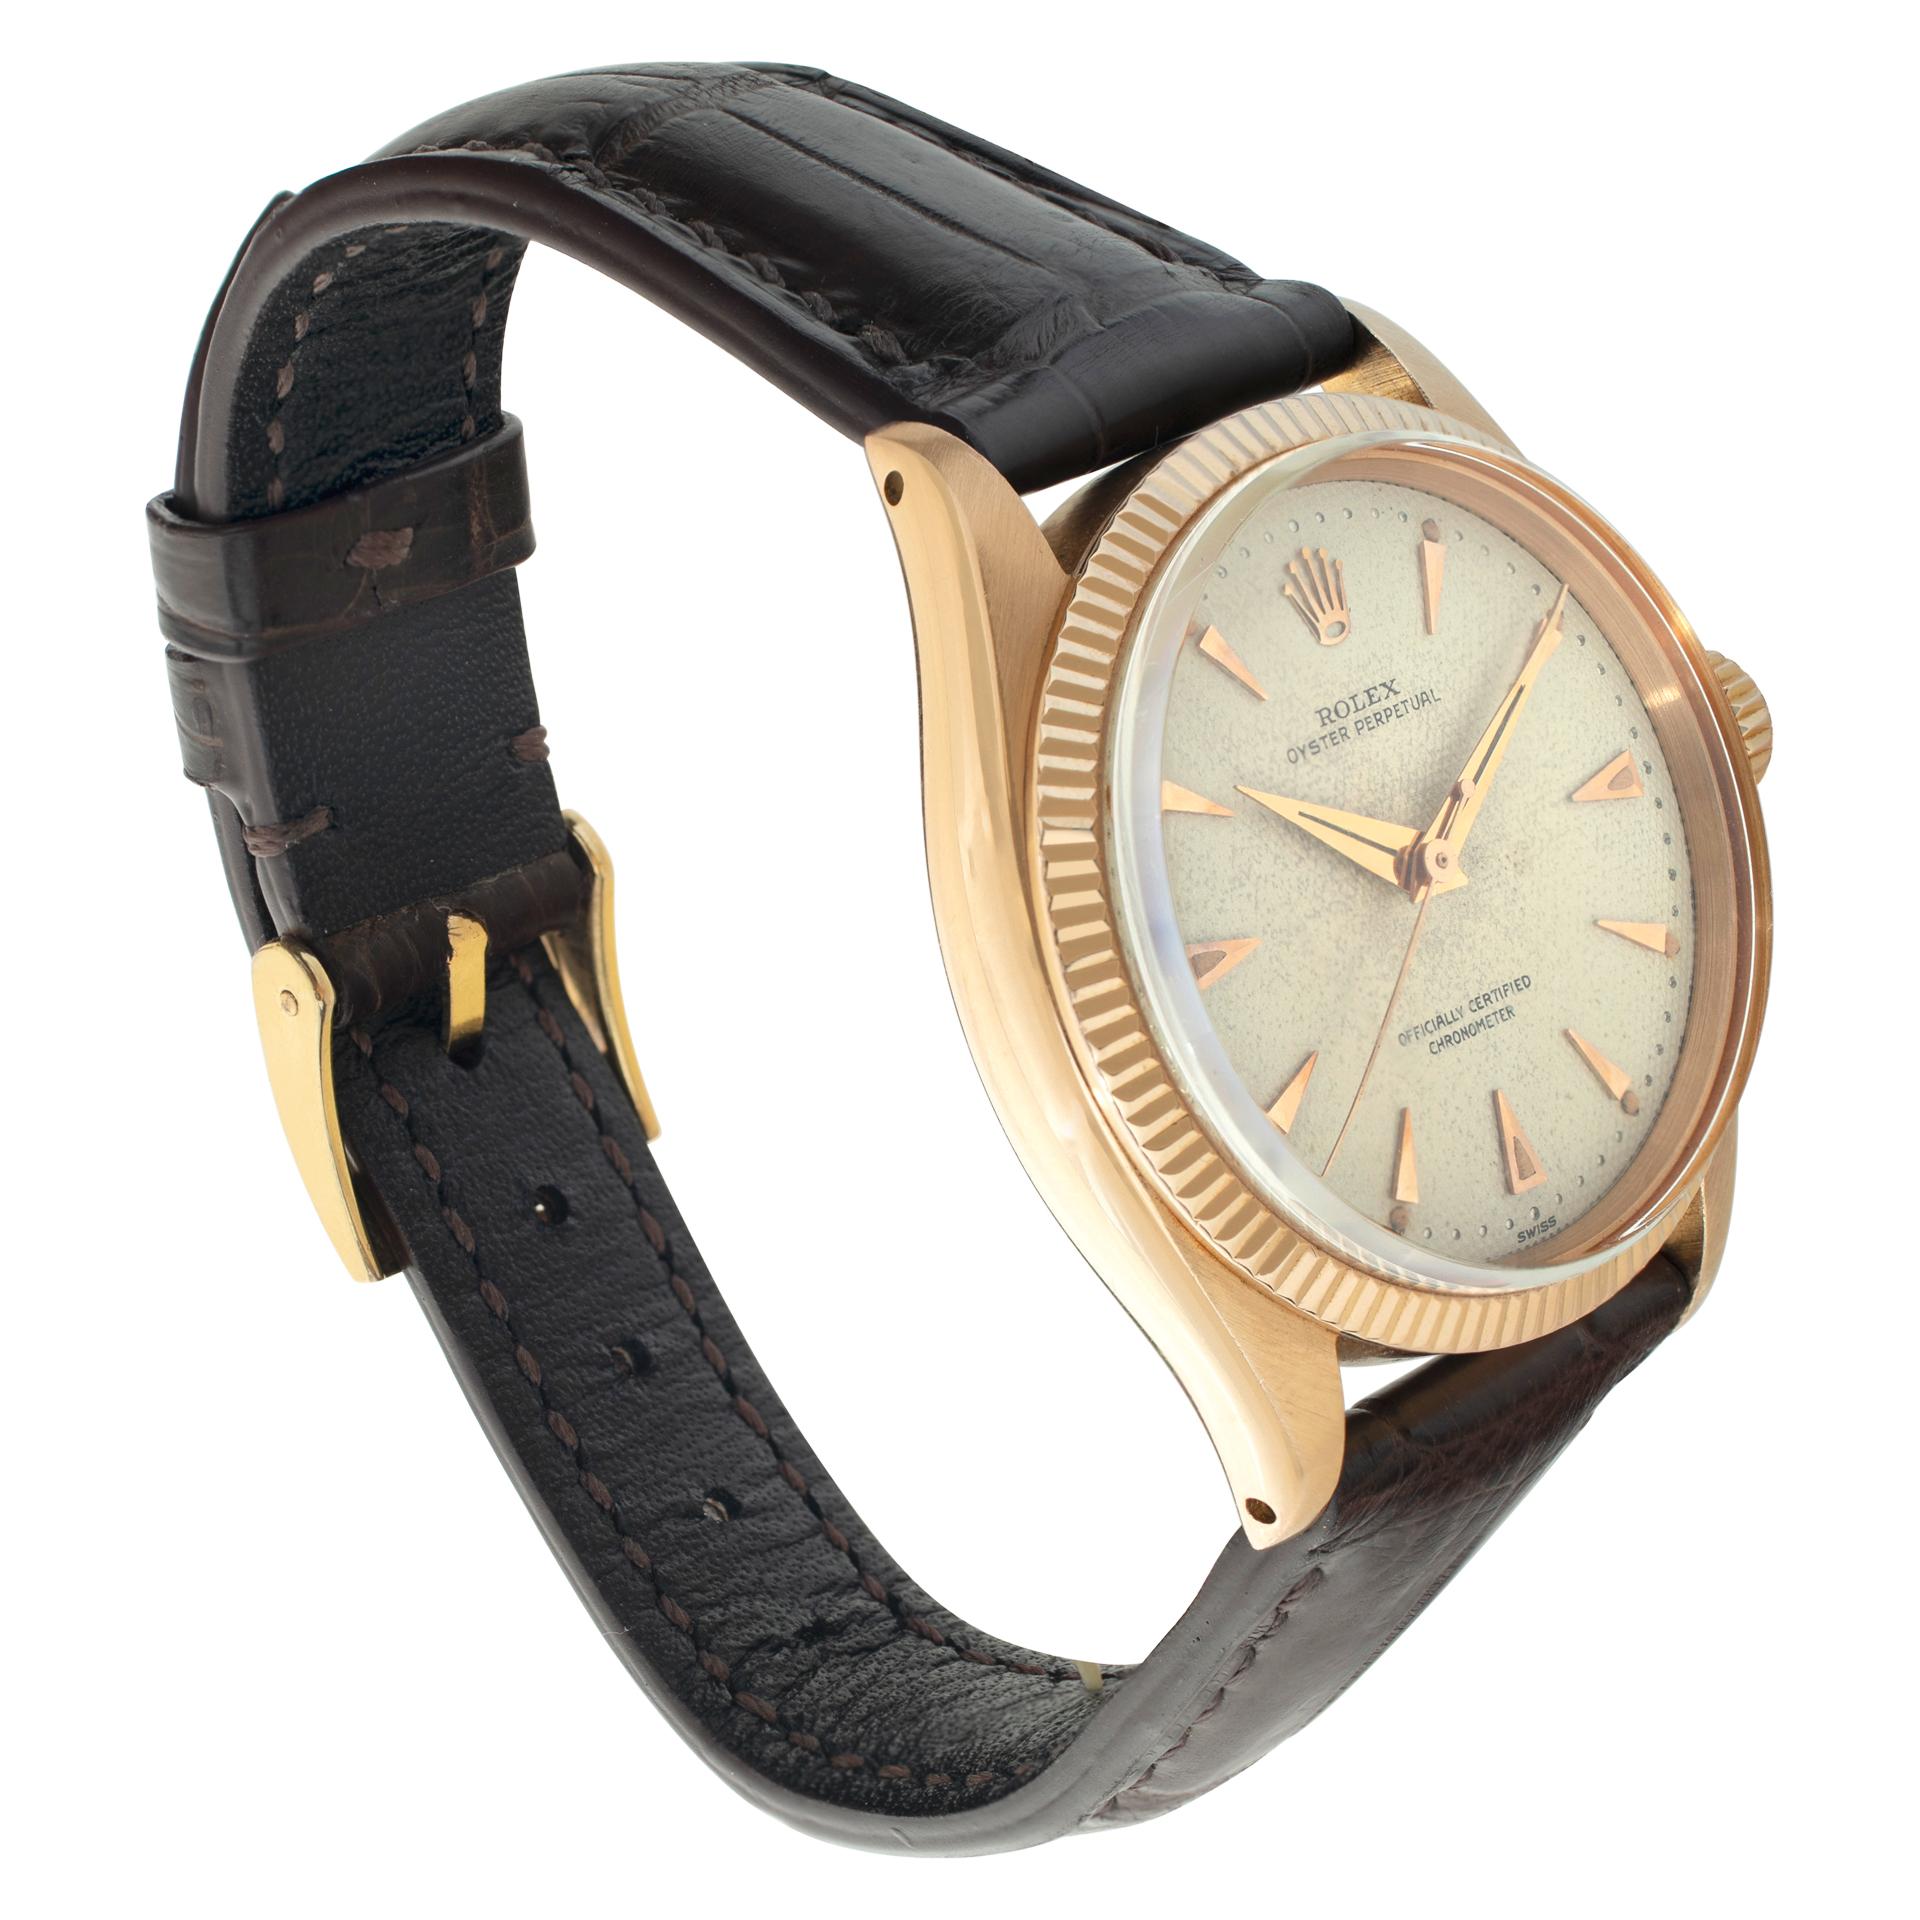 Rolex Oyster Perpetual 18k rose gold Automatic Wristwatch Ref 6285 In Excellent Condition For Sale In Surfside, FL